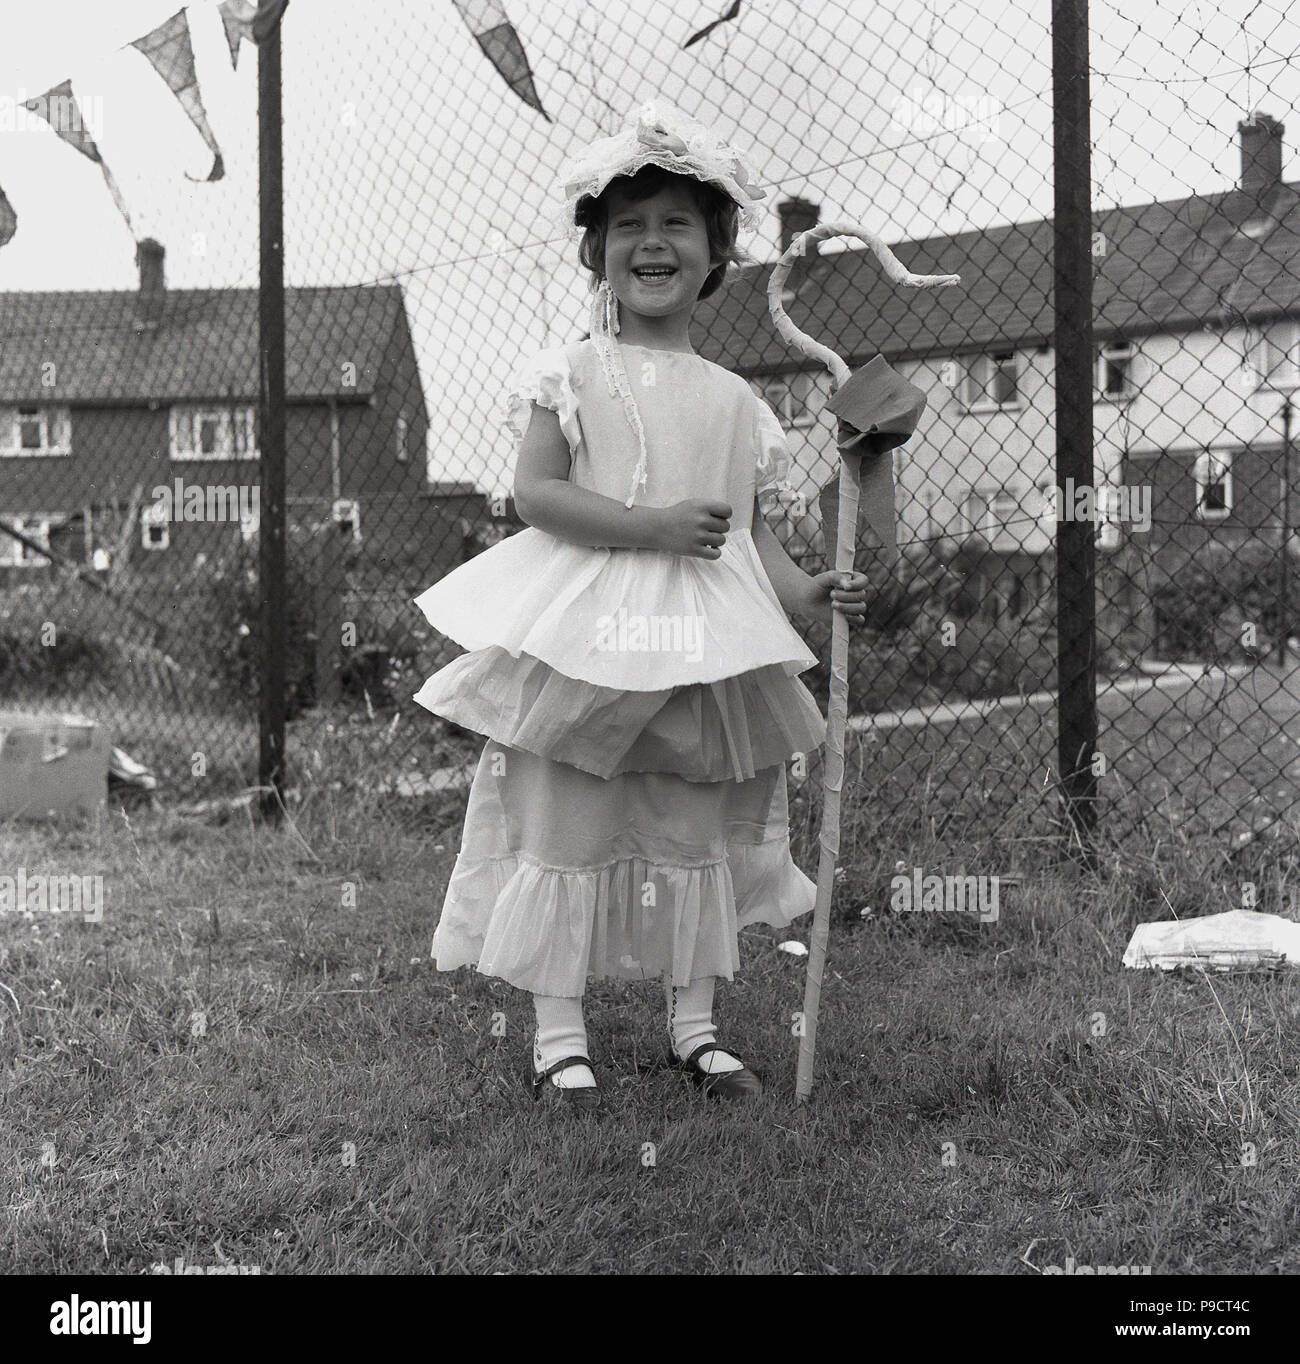 1960s, historical, happy young girl standing outside in a garden dressed in a 'little bo peep' costume, with hat and crook, England, UK. Little Bo Peep, a young shepherdress, was a character from a popular Engllish language nursey rhyme. Stock Photo